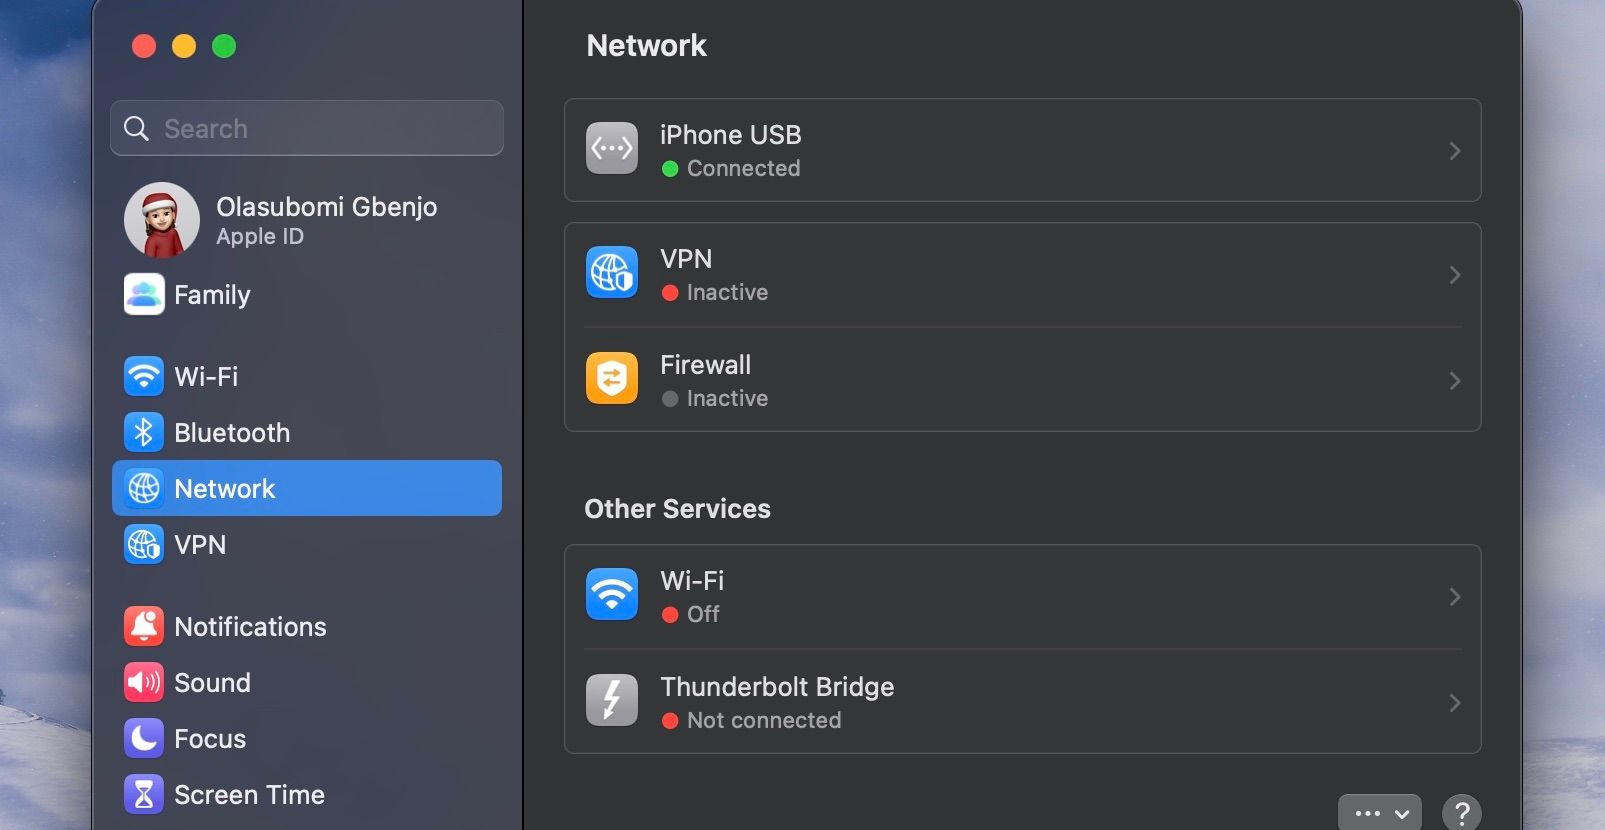 Screenshot of the iPhone USB section in Network settings